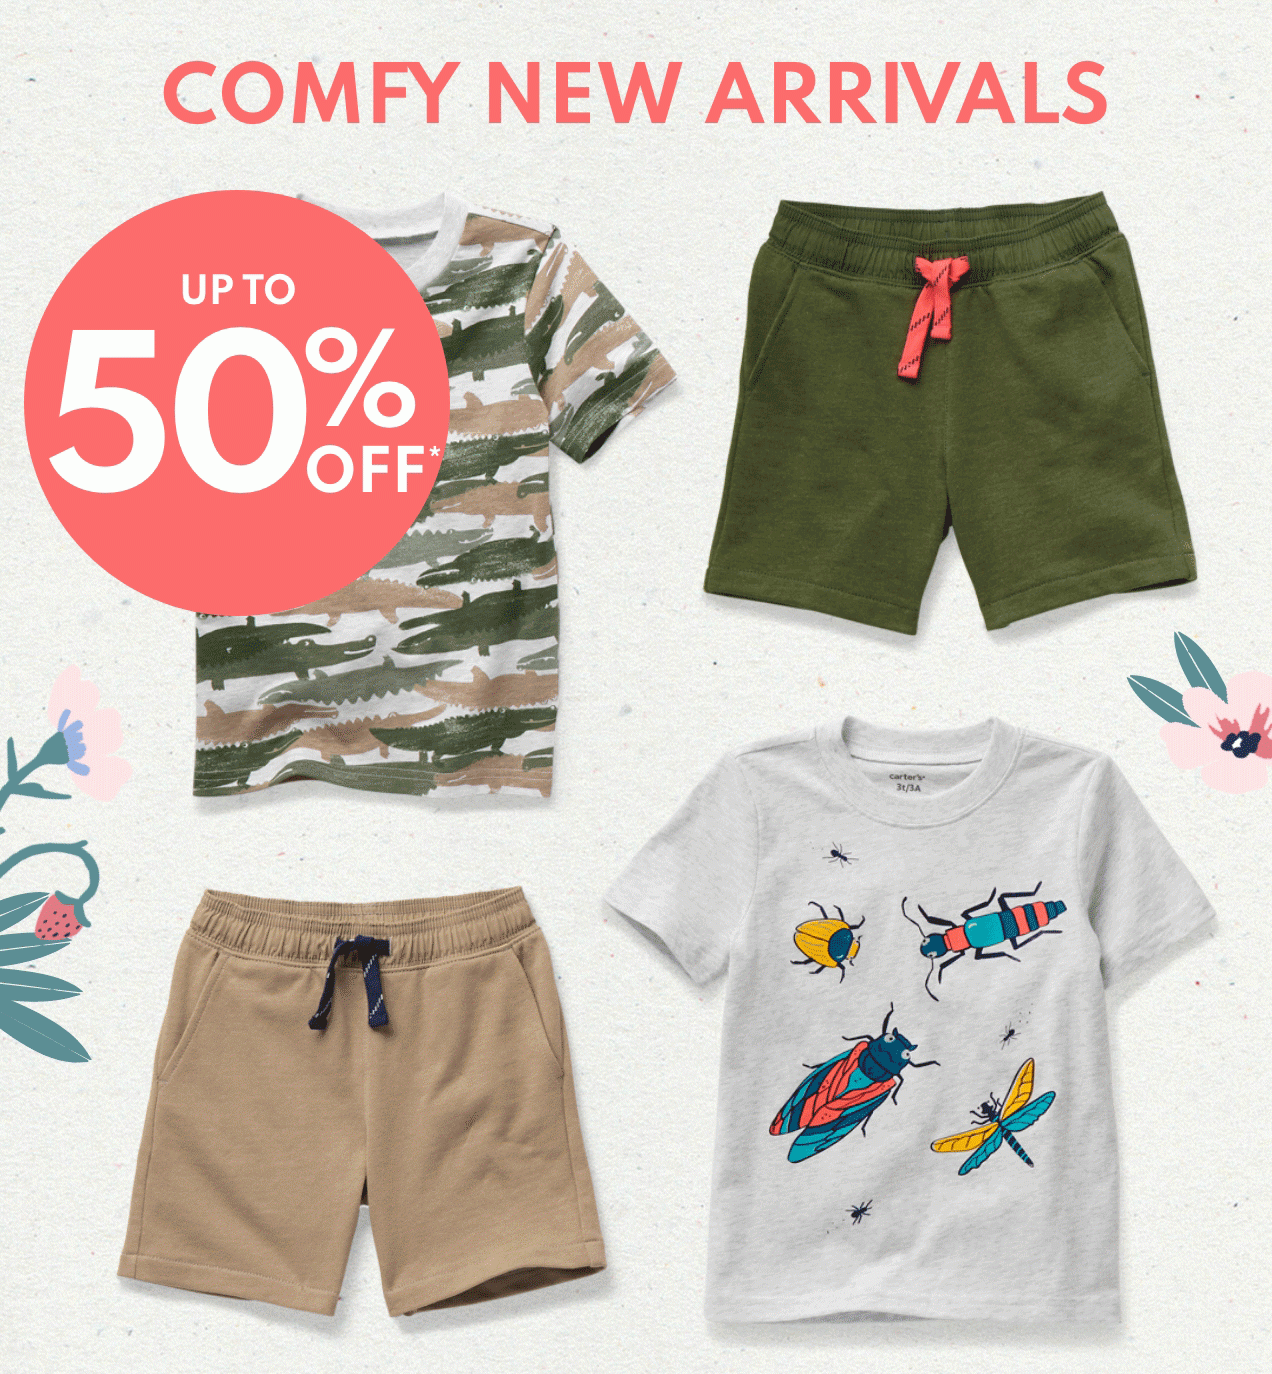 COMFY NEW ARRIVALS | UP TO 50% OFF* 